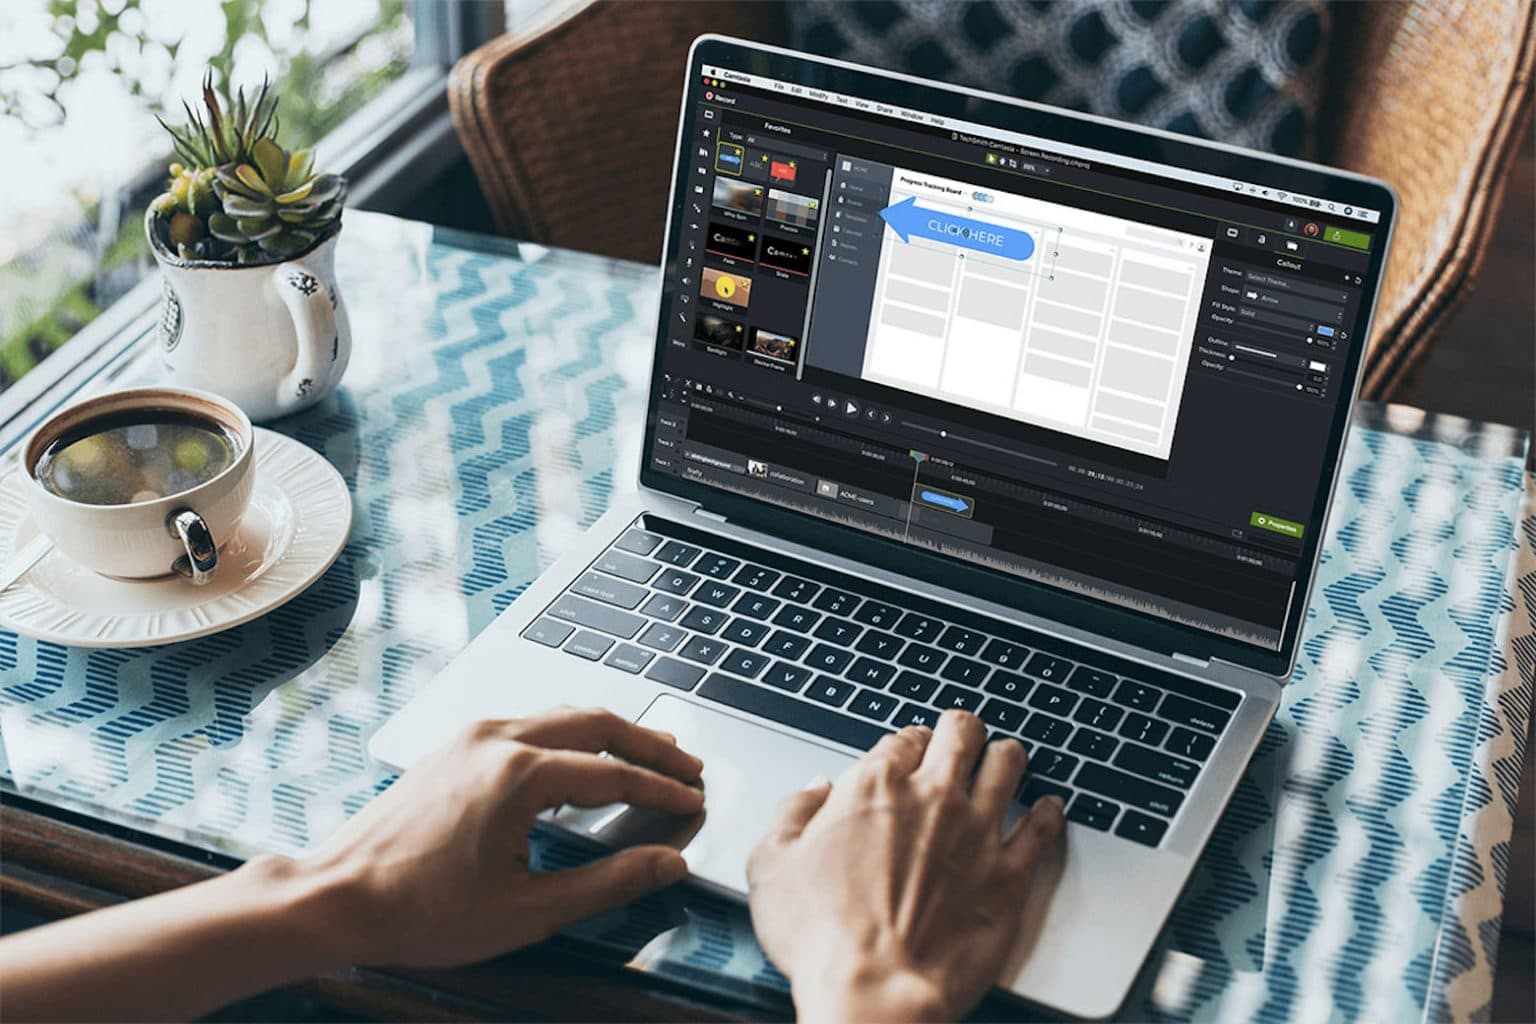 Create professional videos with this amazing editor